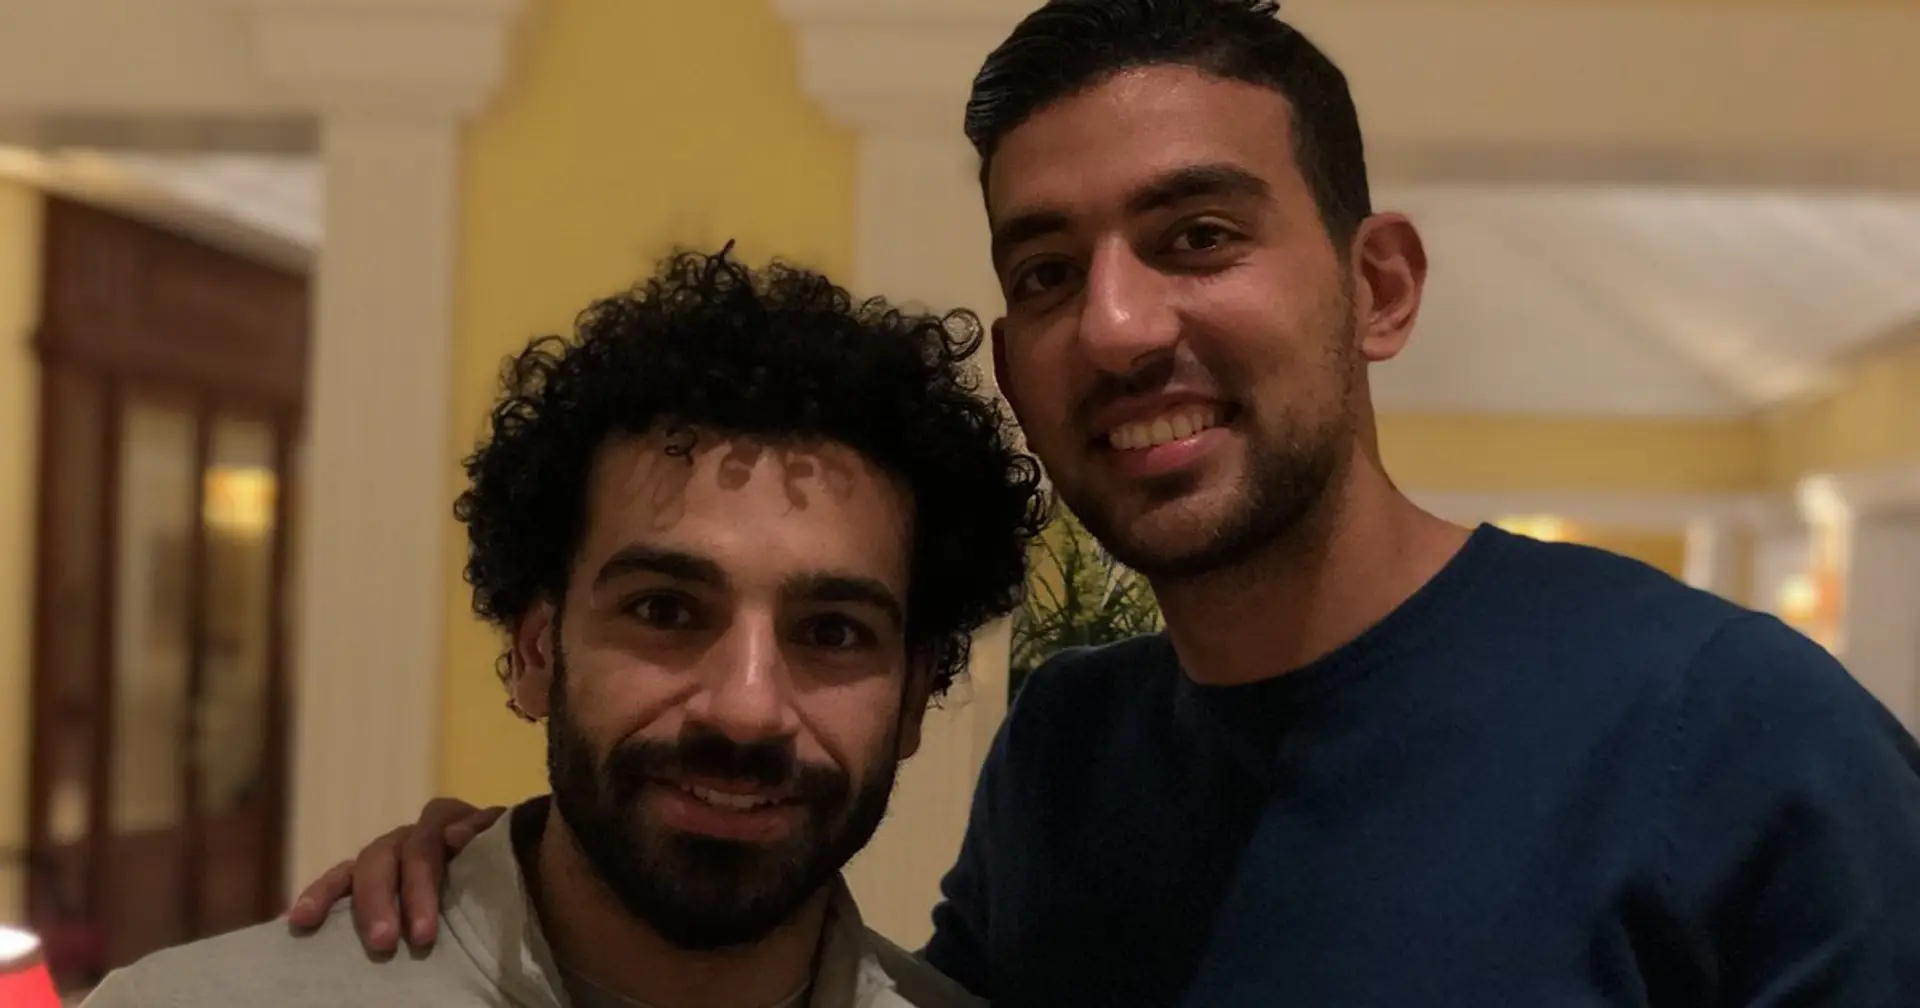 'I will score more goals than he does': Mo Salah's Egypt teammate sets 2020/21 challenge